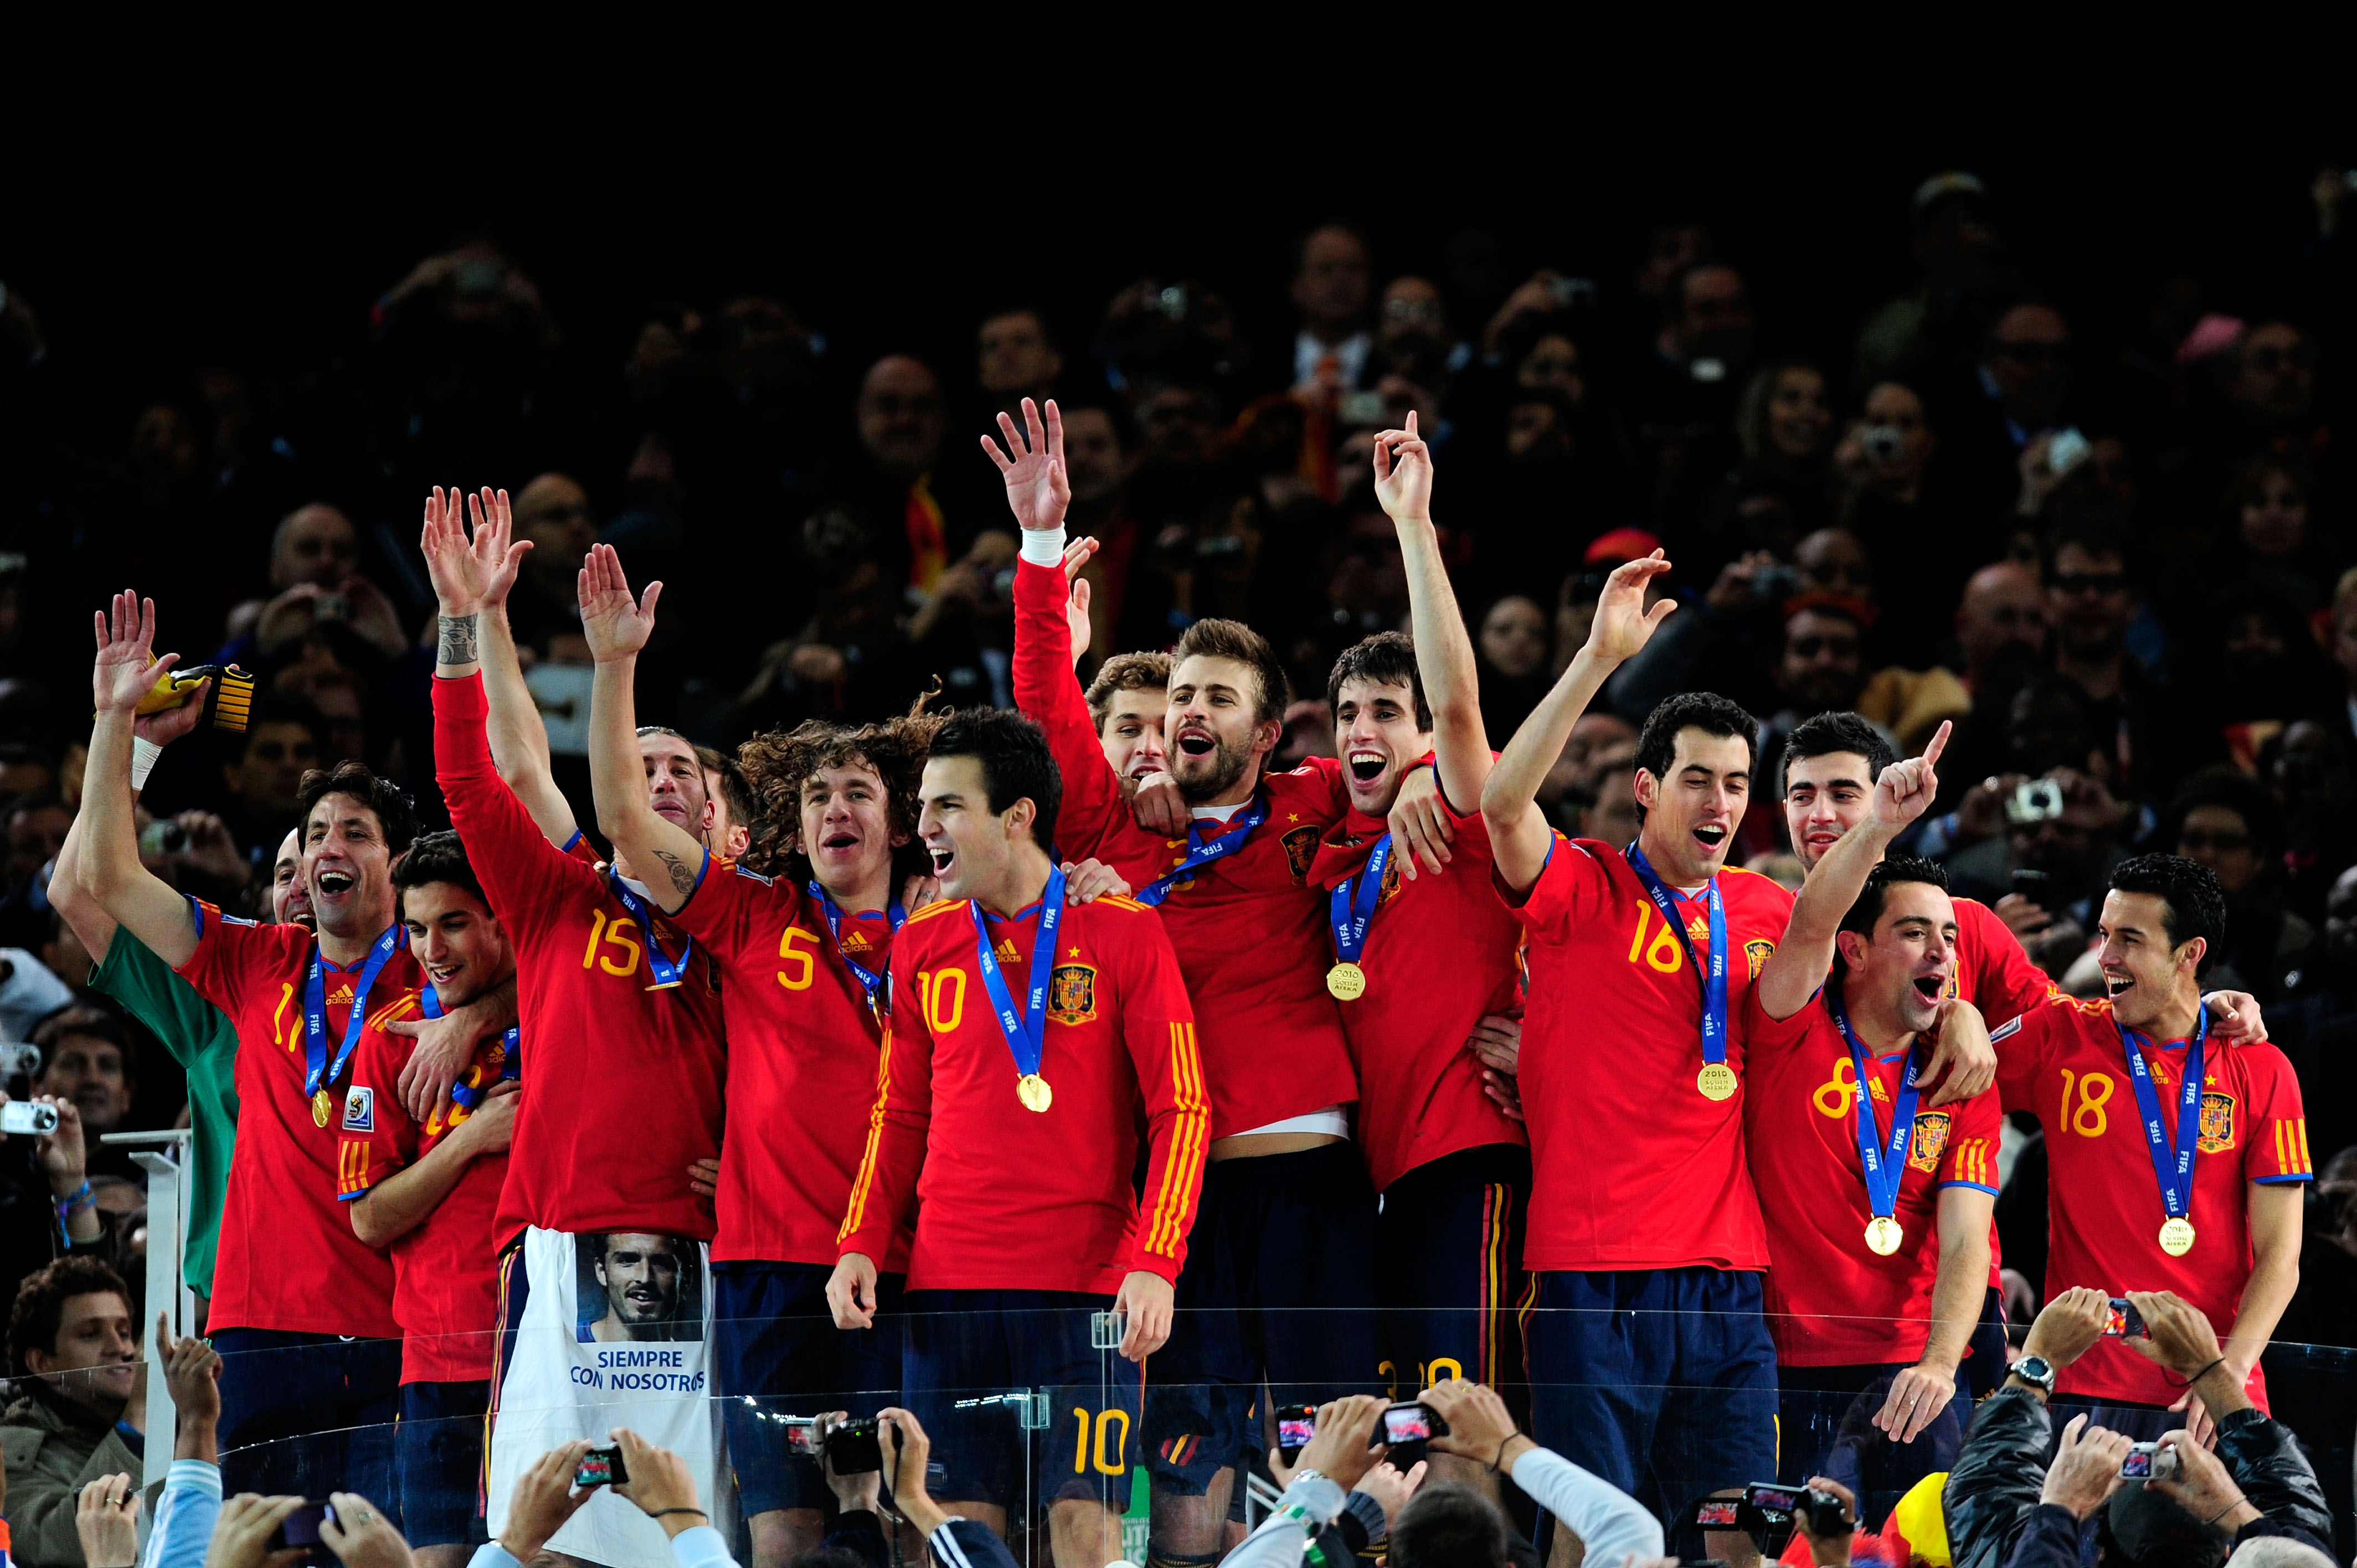 JOHANNESBURG, SOUTH AFRICA - JULY 11:  The Spain team celebrate winning the World Cup during the 2010 FIFA World Cup South Africa Final match between Netherlands and Spain at Soccer City Stadium on July 11, 2010 in Johannesburg, South Africa.  (Photo by J